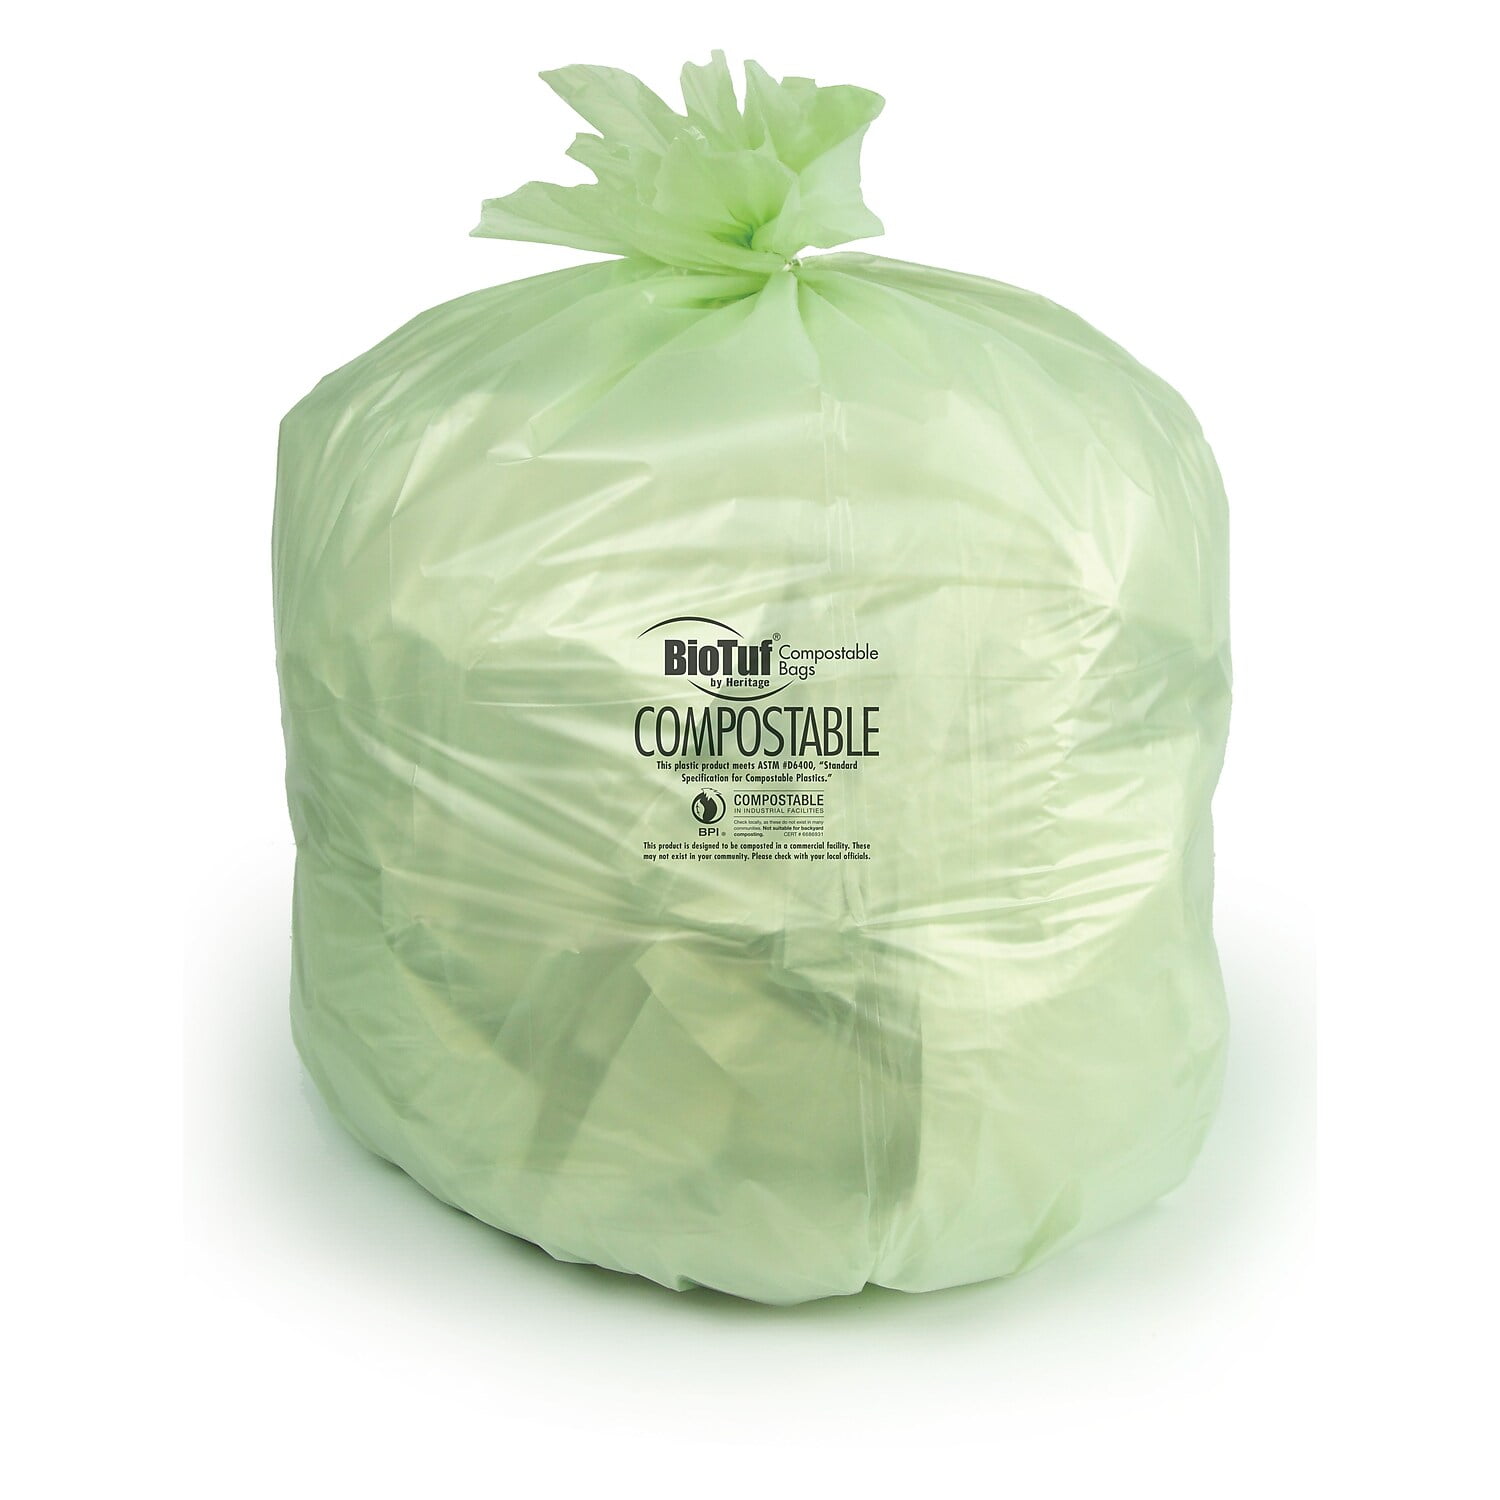 Compostable Drawstring Trash Bags Biodegradable, 13 Gallon Tall Kitchen  Large Garbage Bags,50 Count,Heavy Duty 1 Mil, 49.2 Liter,100% Compost Food